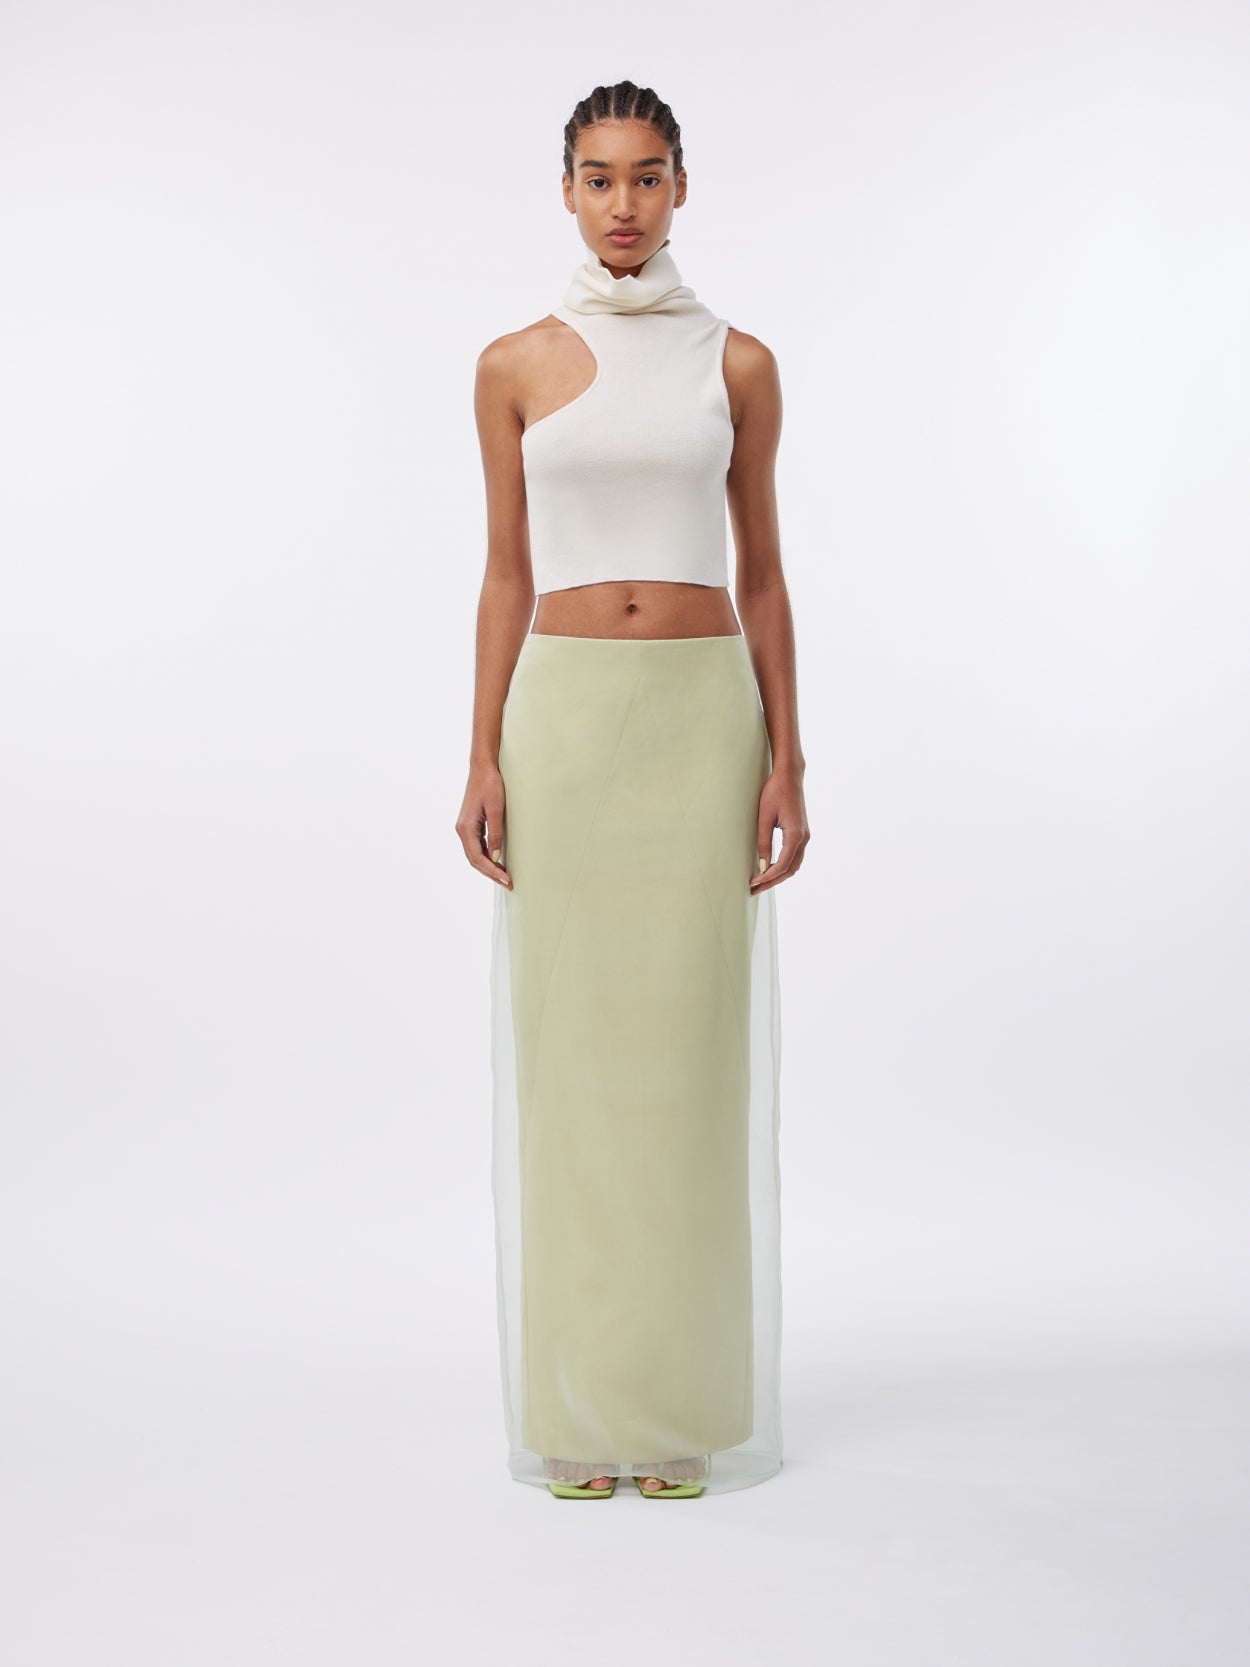 model wearing a white turtleneck wool crop top and a green pale long skirt with veil